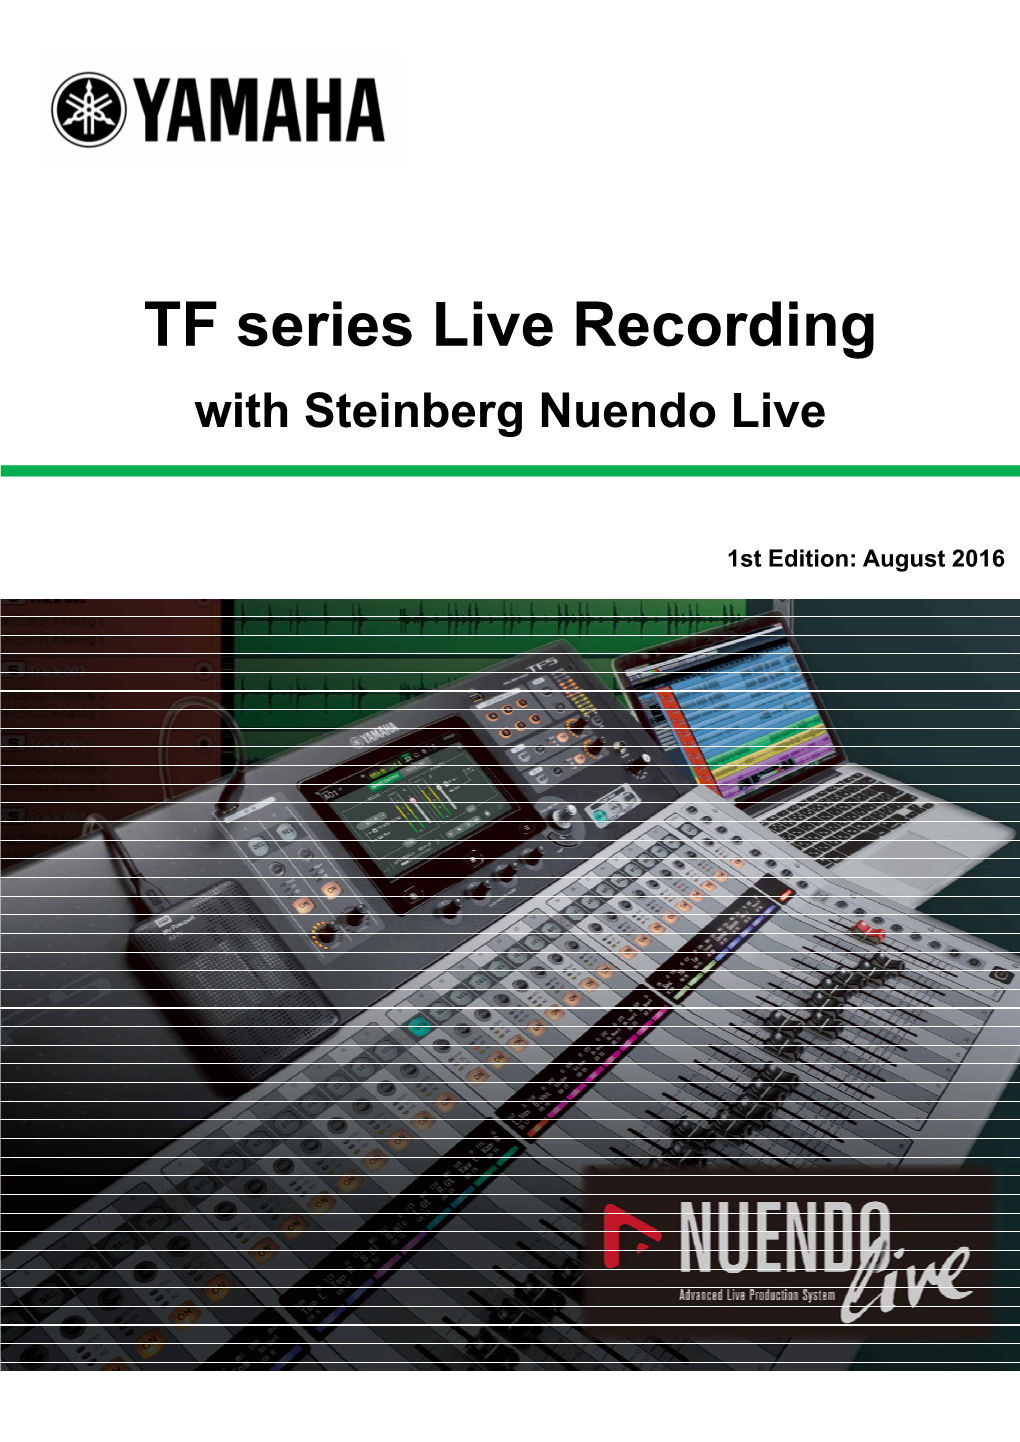 TF Series Live Recording with Steinberg Nuendo Live